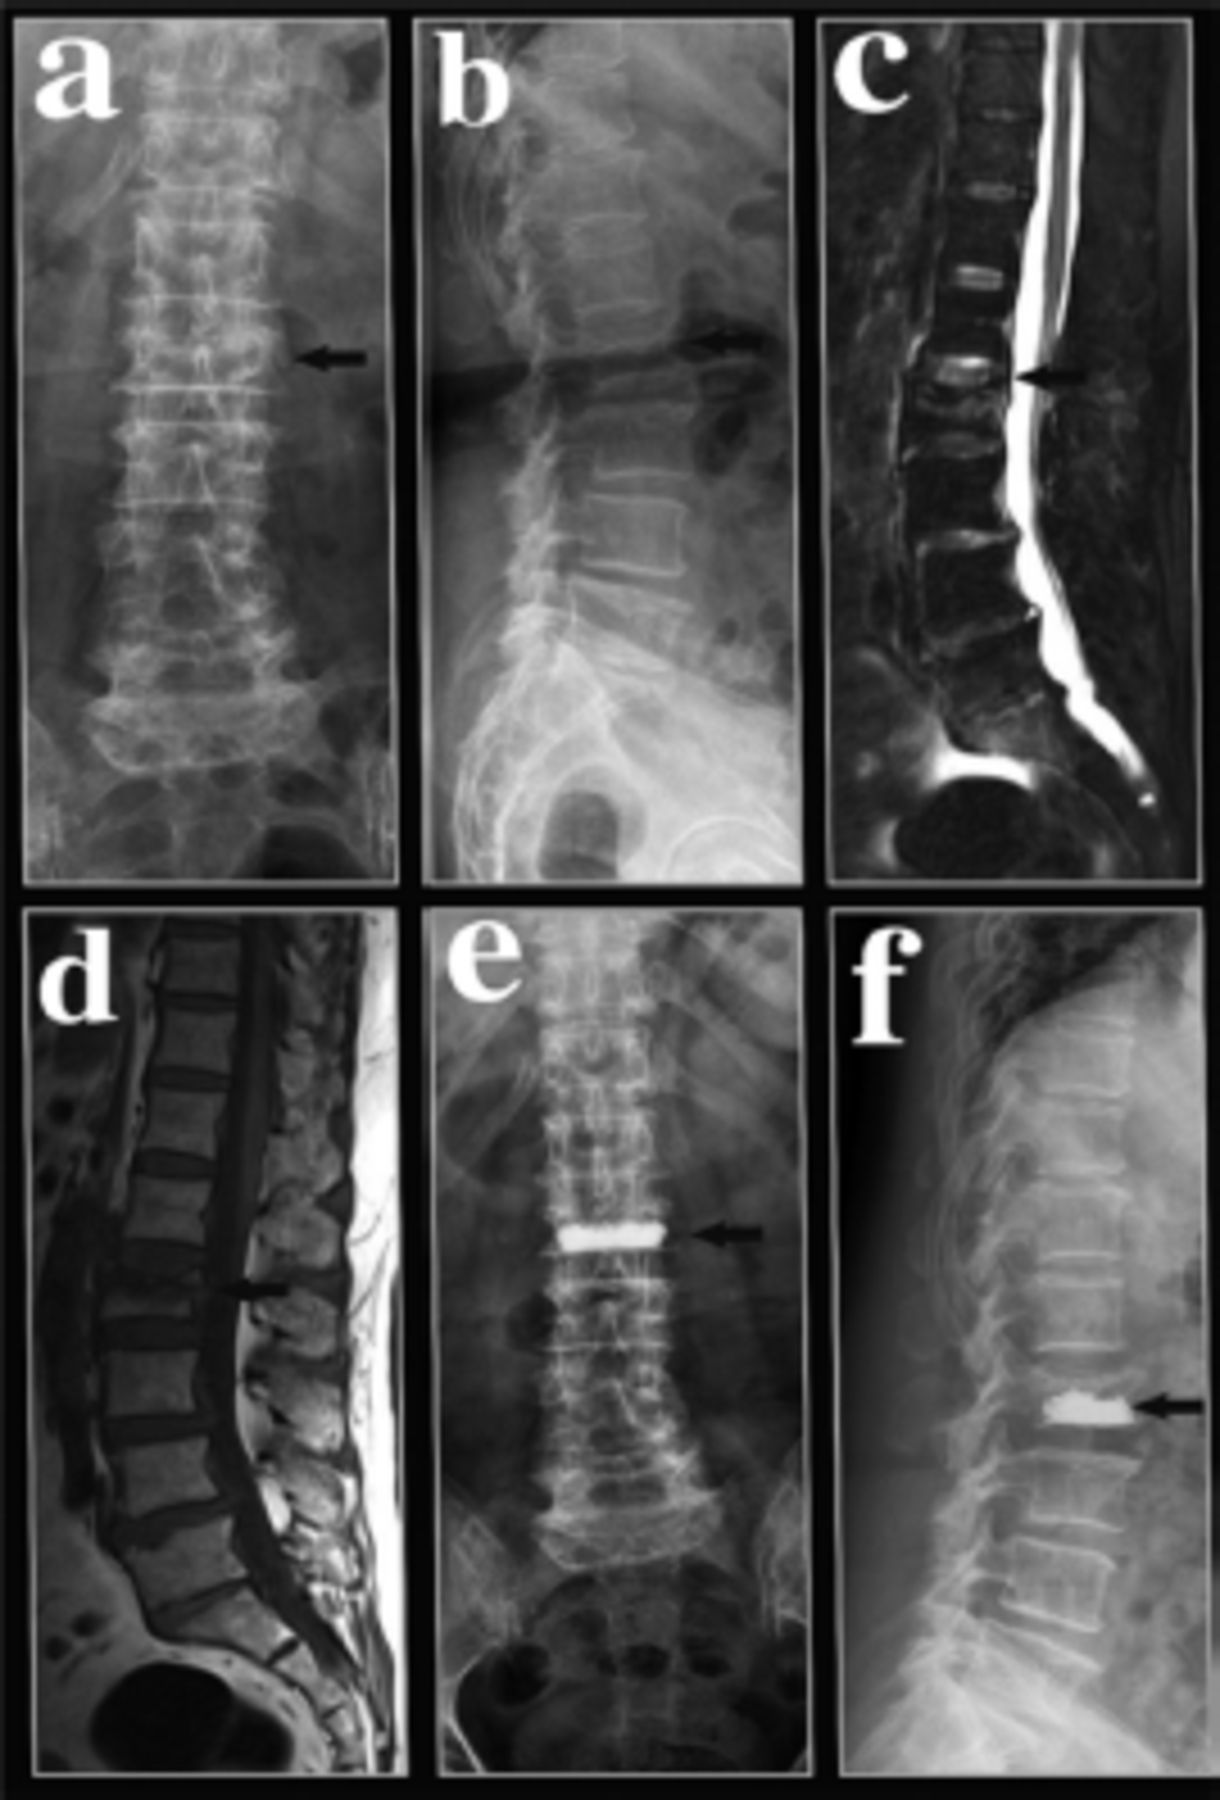 Plateau Aanvrager terwijl Comparison of unilateral and bilateral puncture percutaneous kyphoplasty in  the treatment of osteoporotic vertebral compression fractures |  Neurosciences Journal